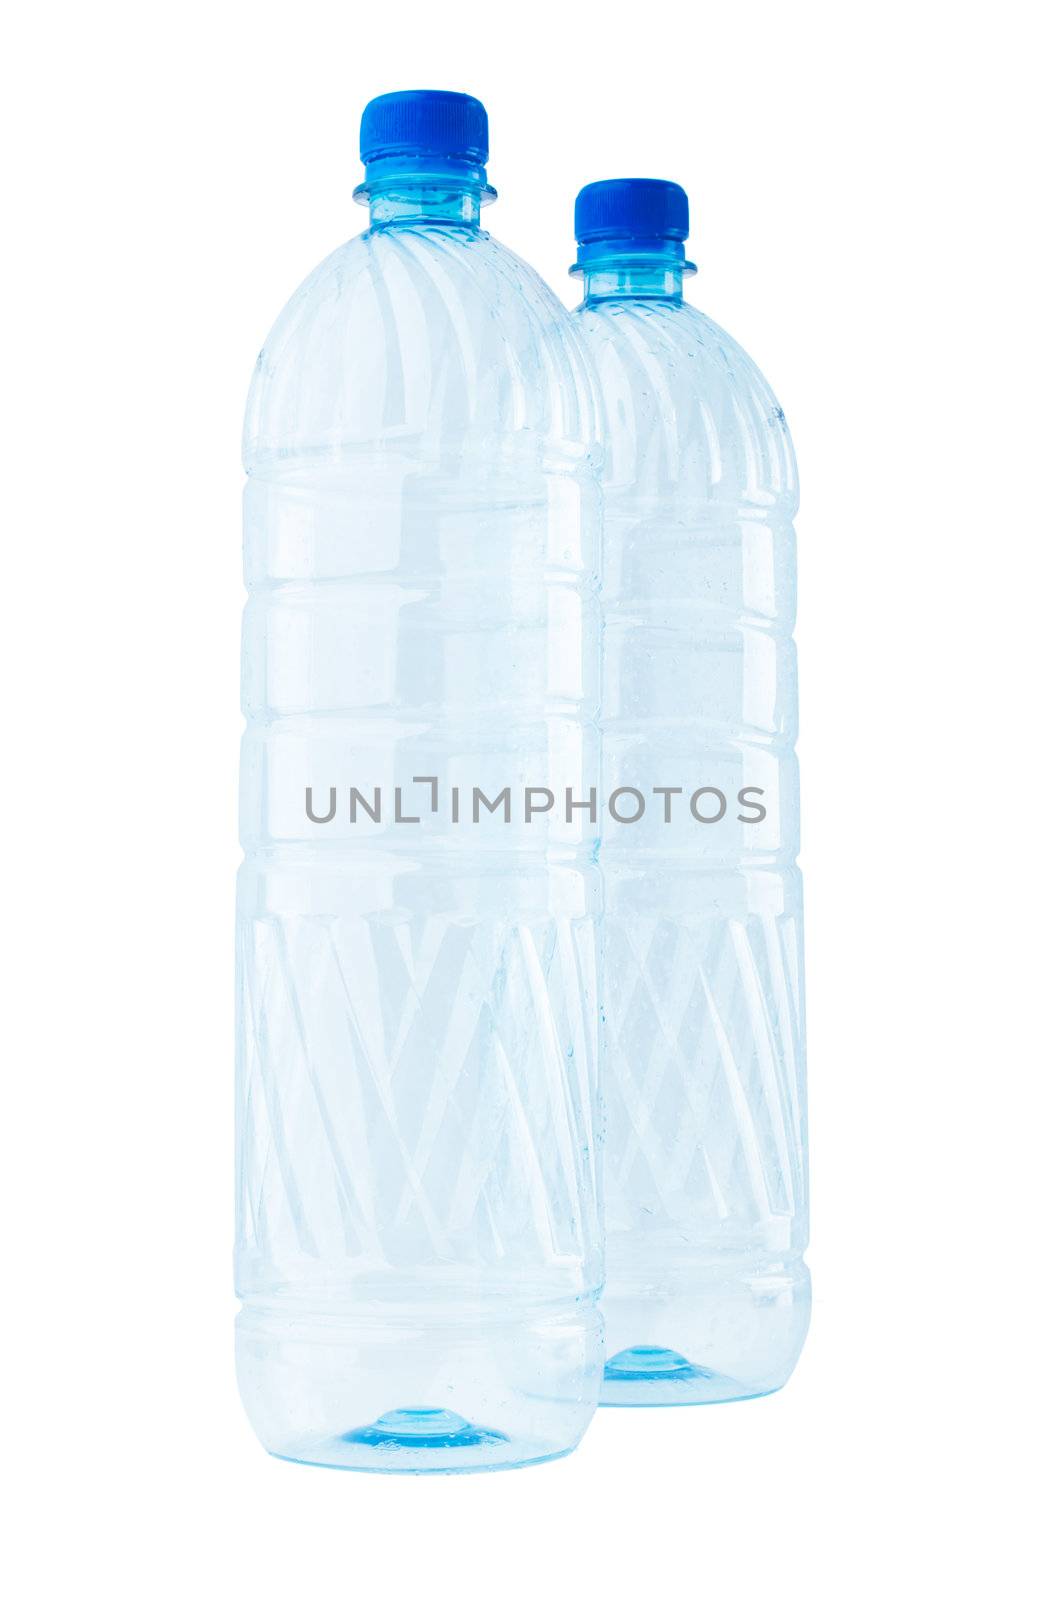 Two empty plastic bottles isolated on white.